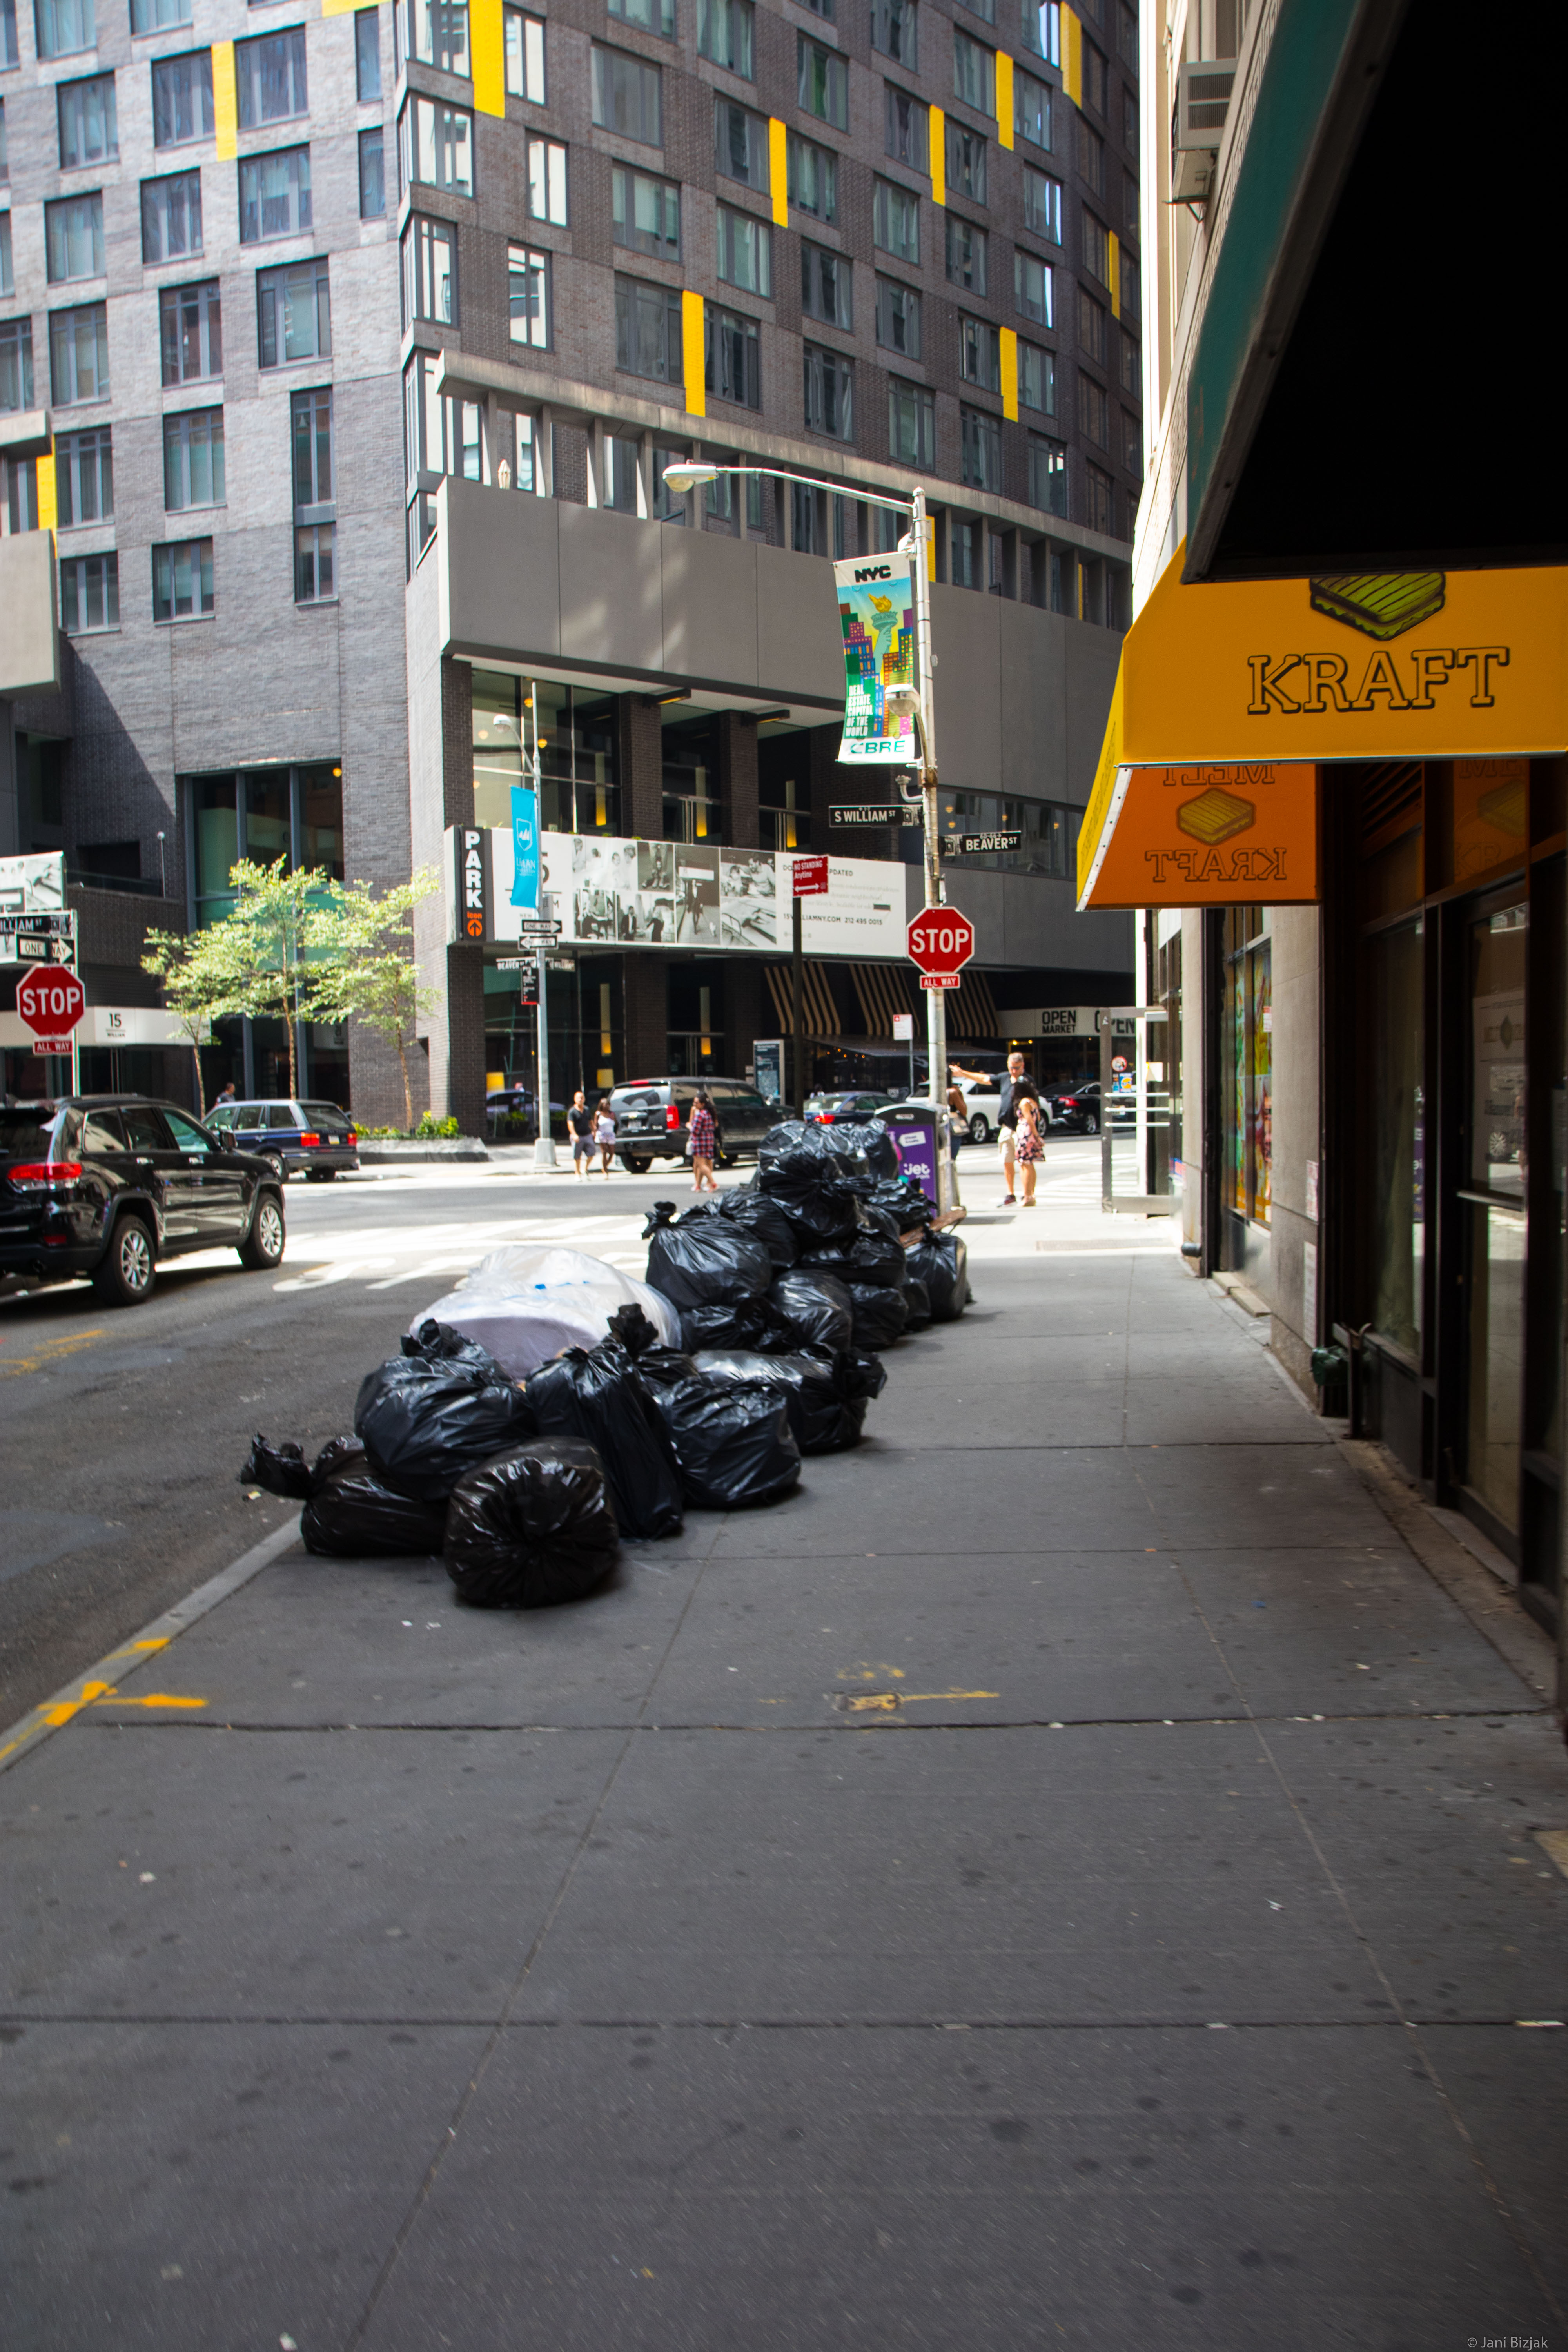 Trash bags in the middle of the street